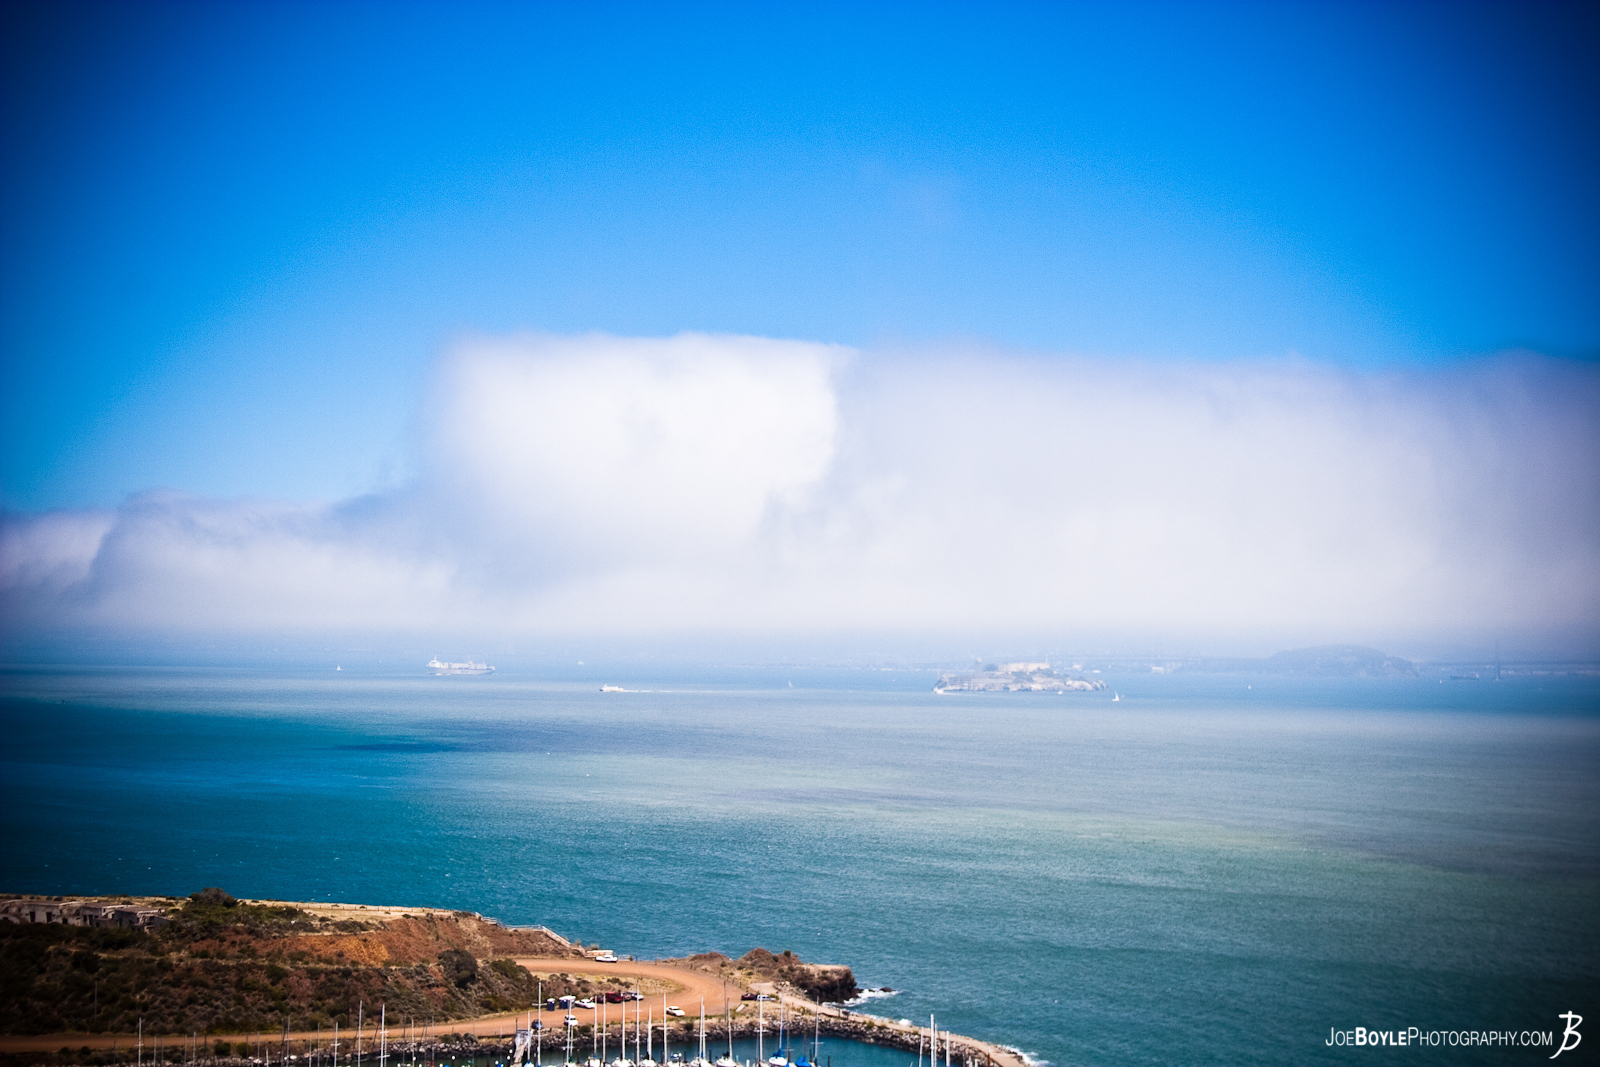  A view of San Francisco Bay. The weather was changing all day in the Bay area! I was fortunate enough to capture this image. I really like how the clouds were forming in this image. 